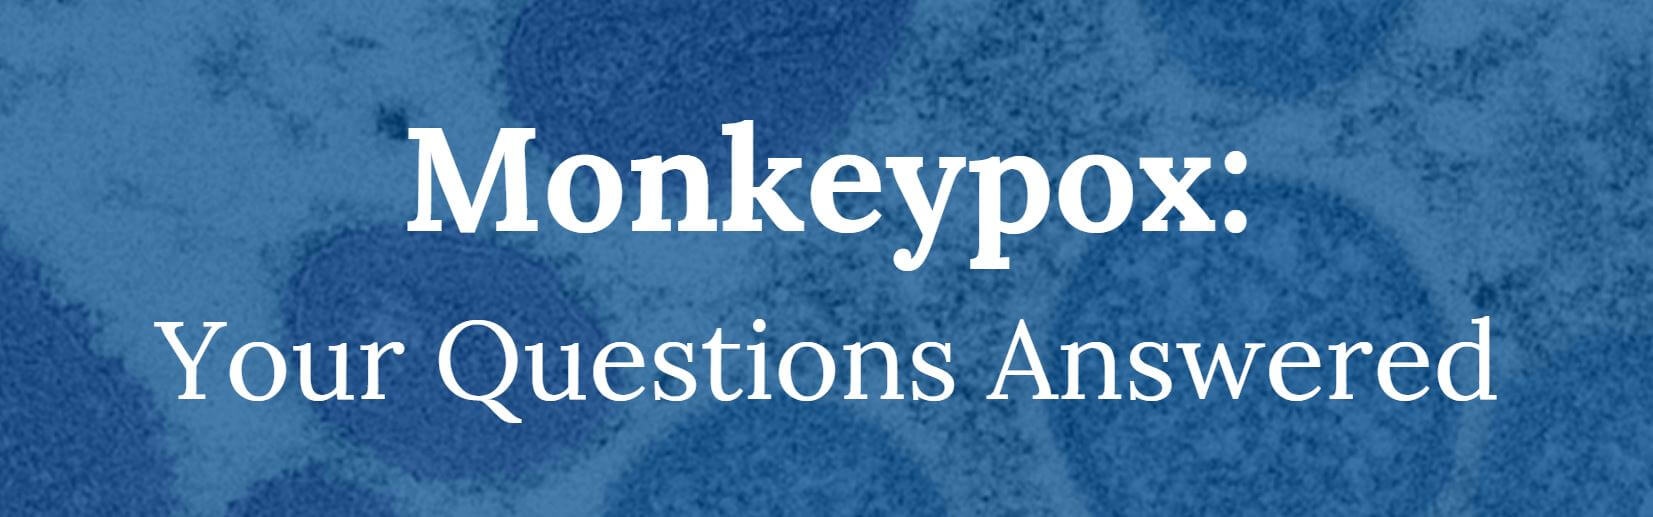 Monkeypox: Your questions answered